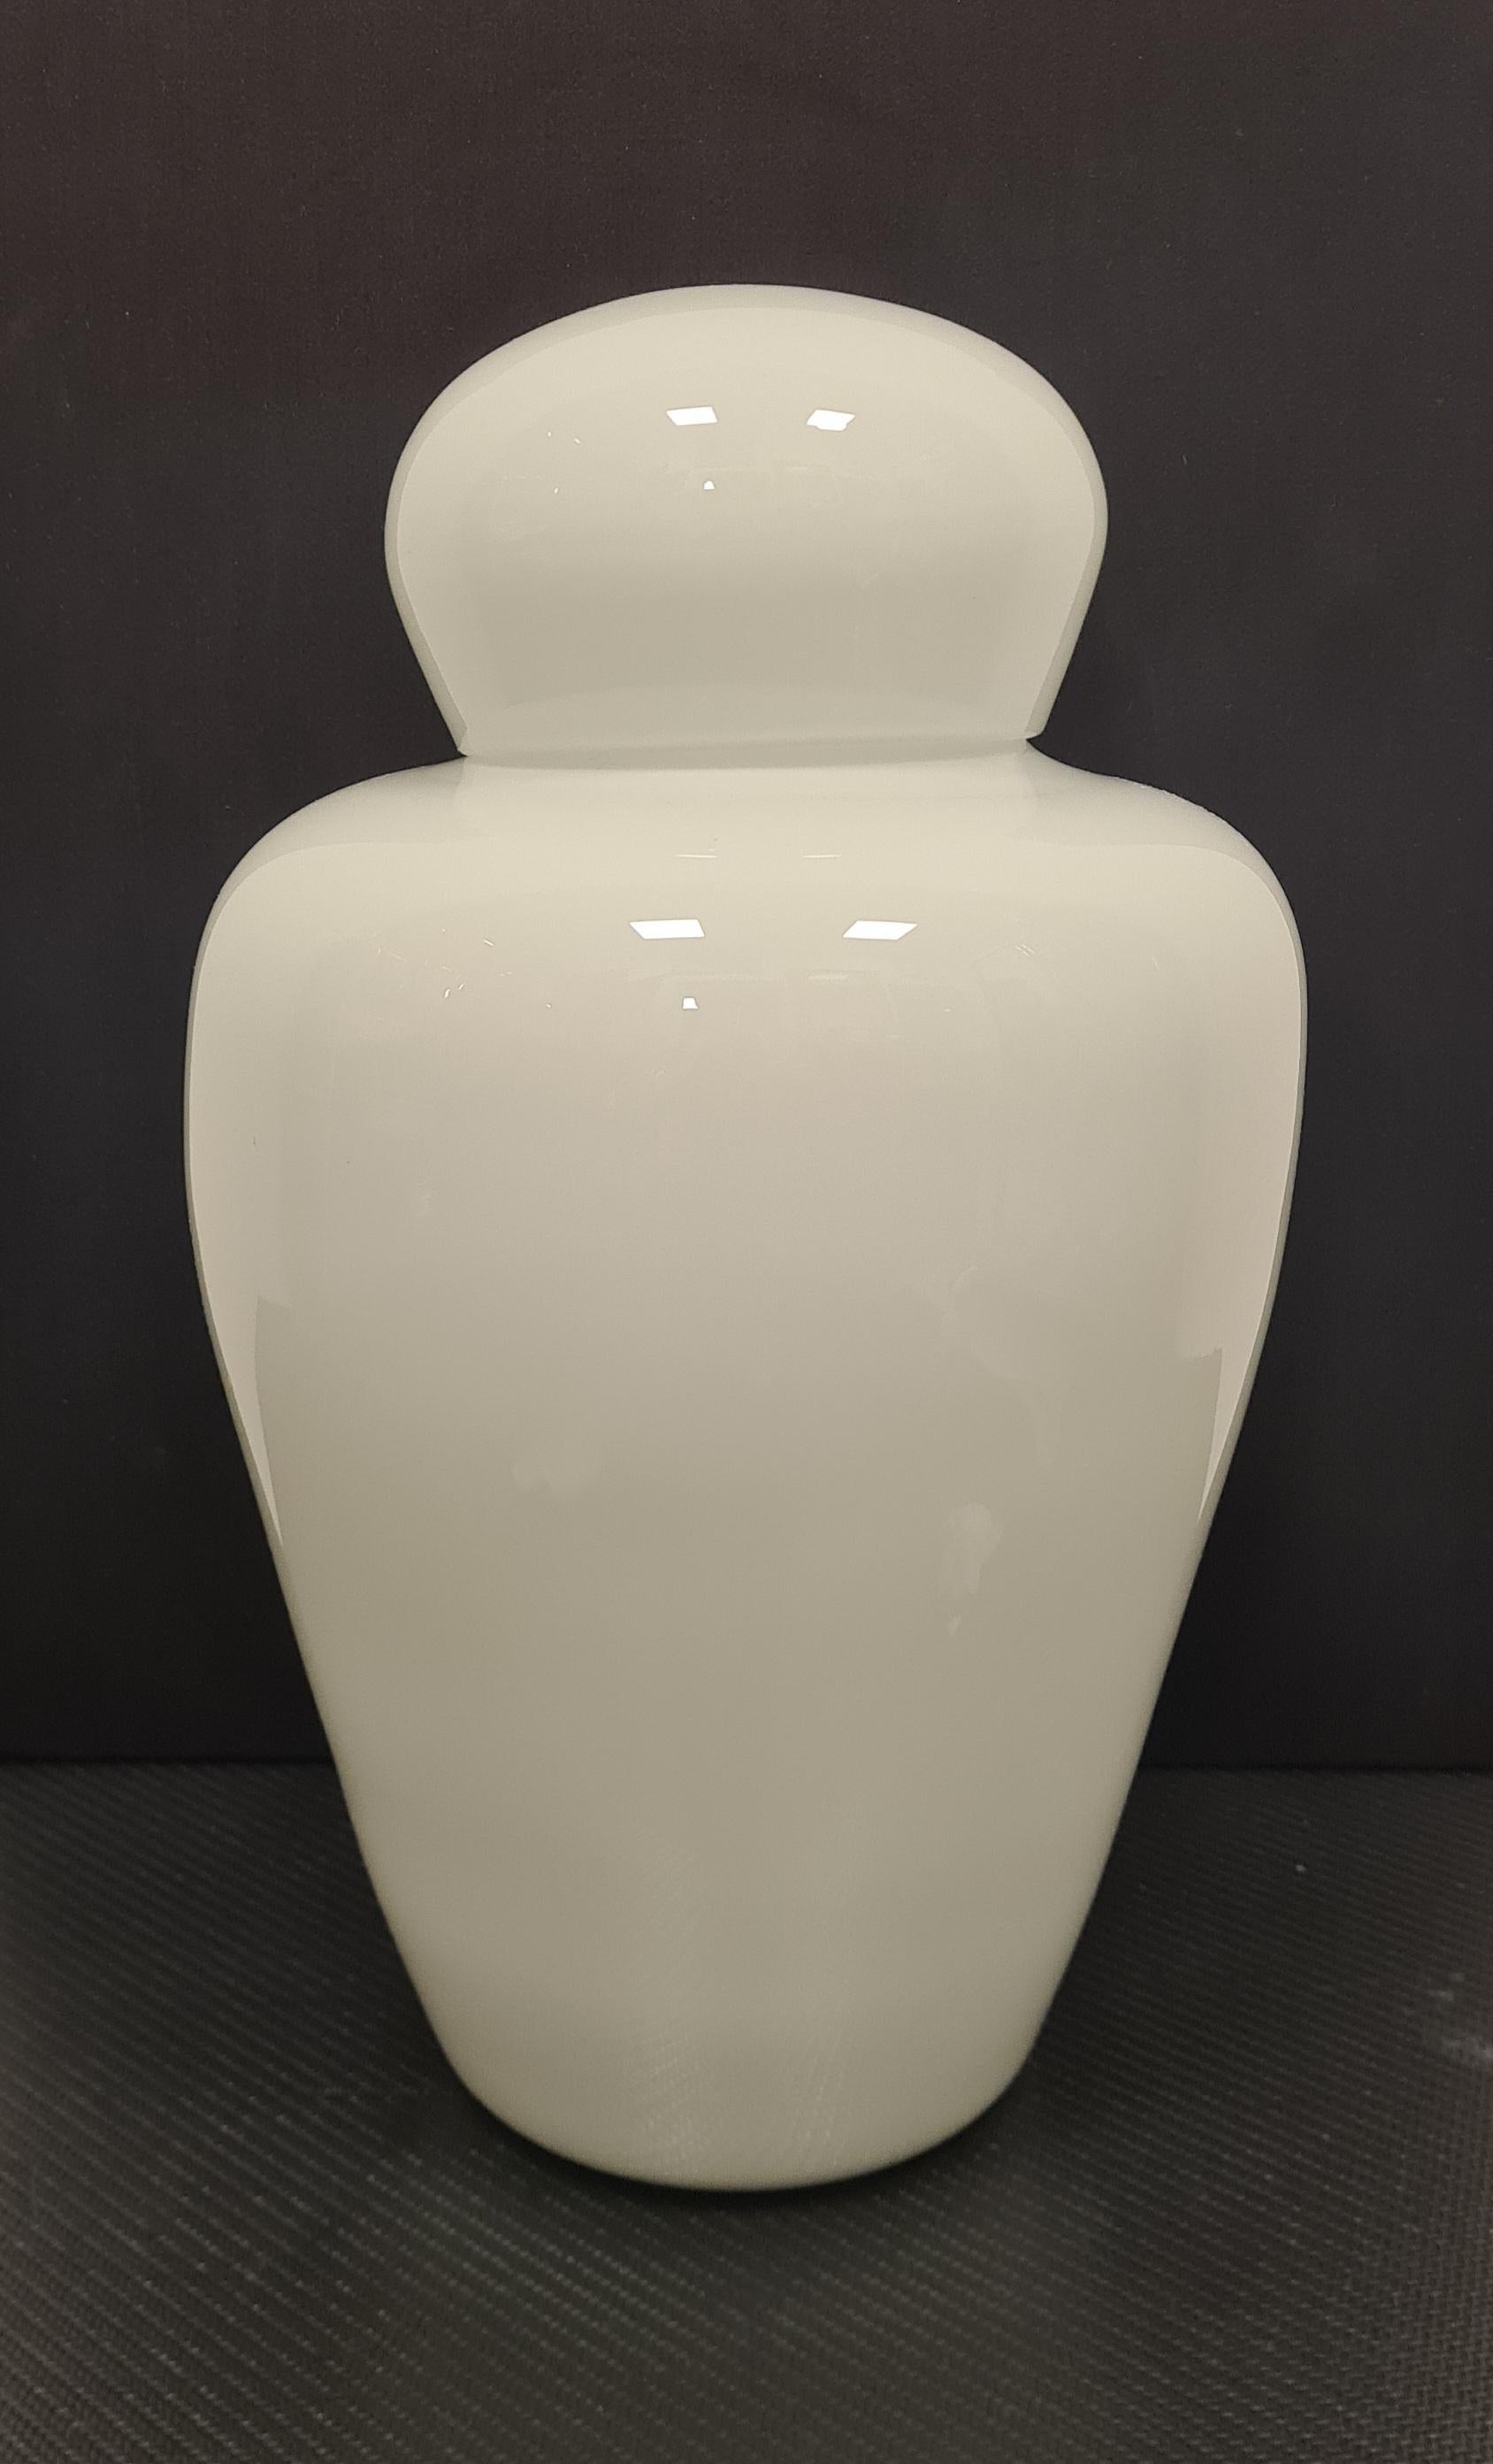 Vase from the Chinese series designed by Tobia Scarpa for Venini.

Elegant vase with lid made of white etched glass.

The Cinesi series was' designed by Carlo Scarpa in the 1940s, his son Tobia starting in the 1960s made numerous variations of it